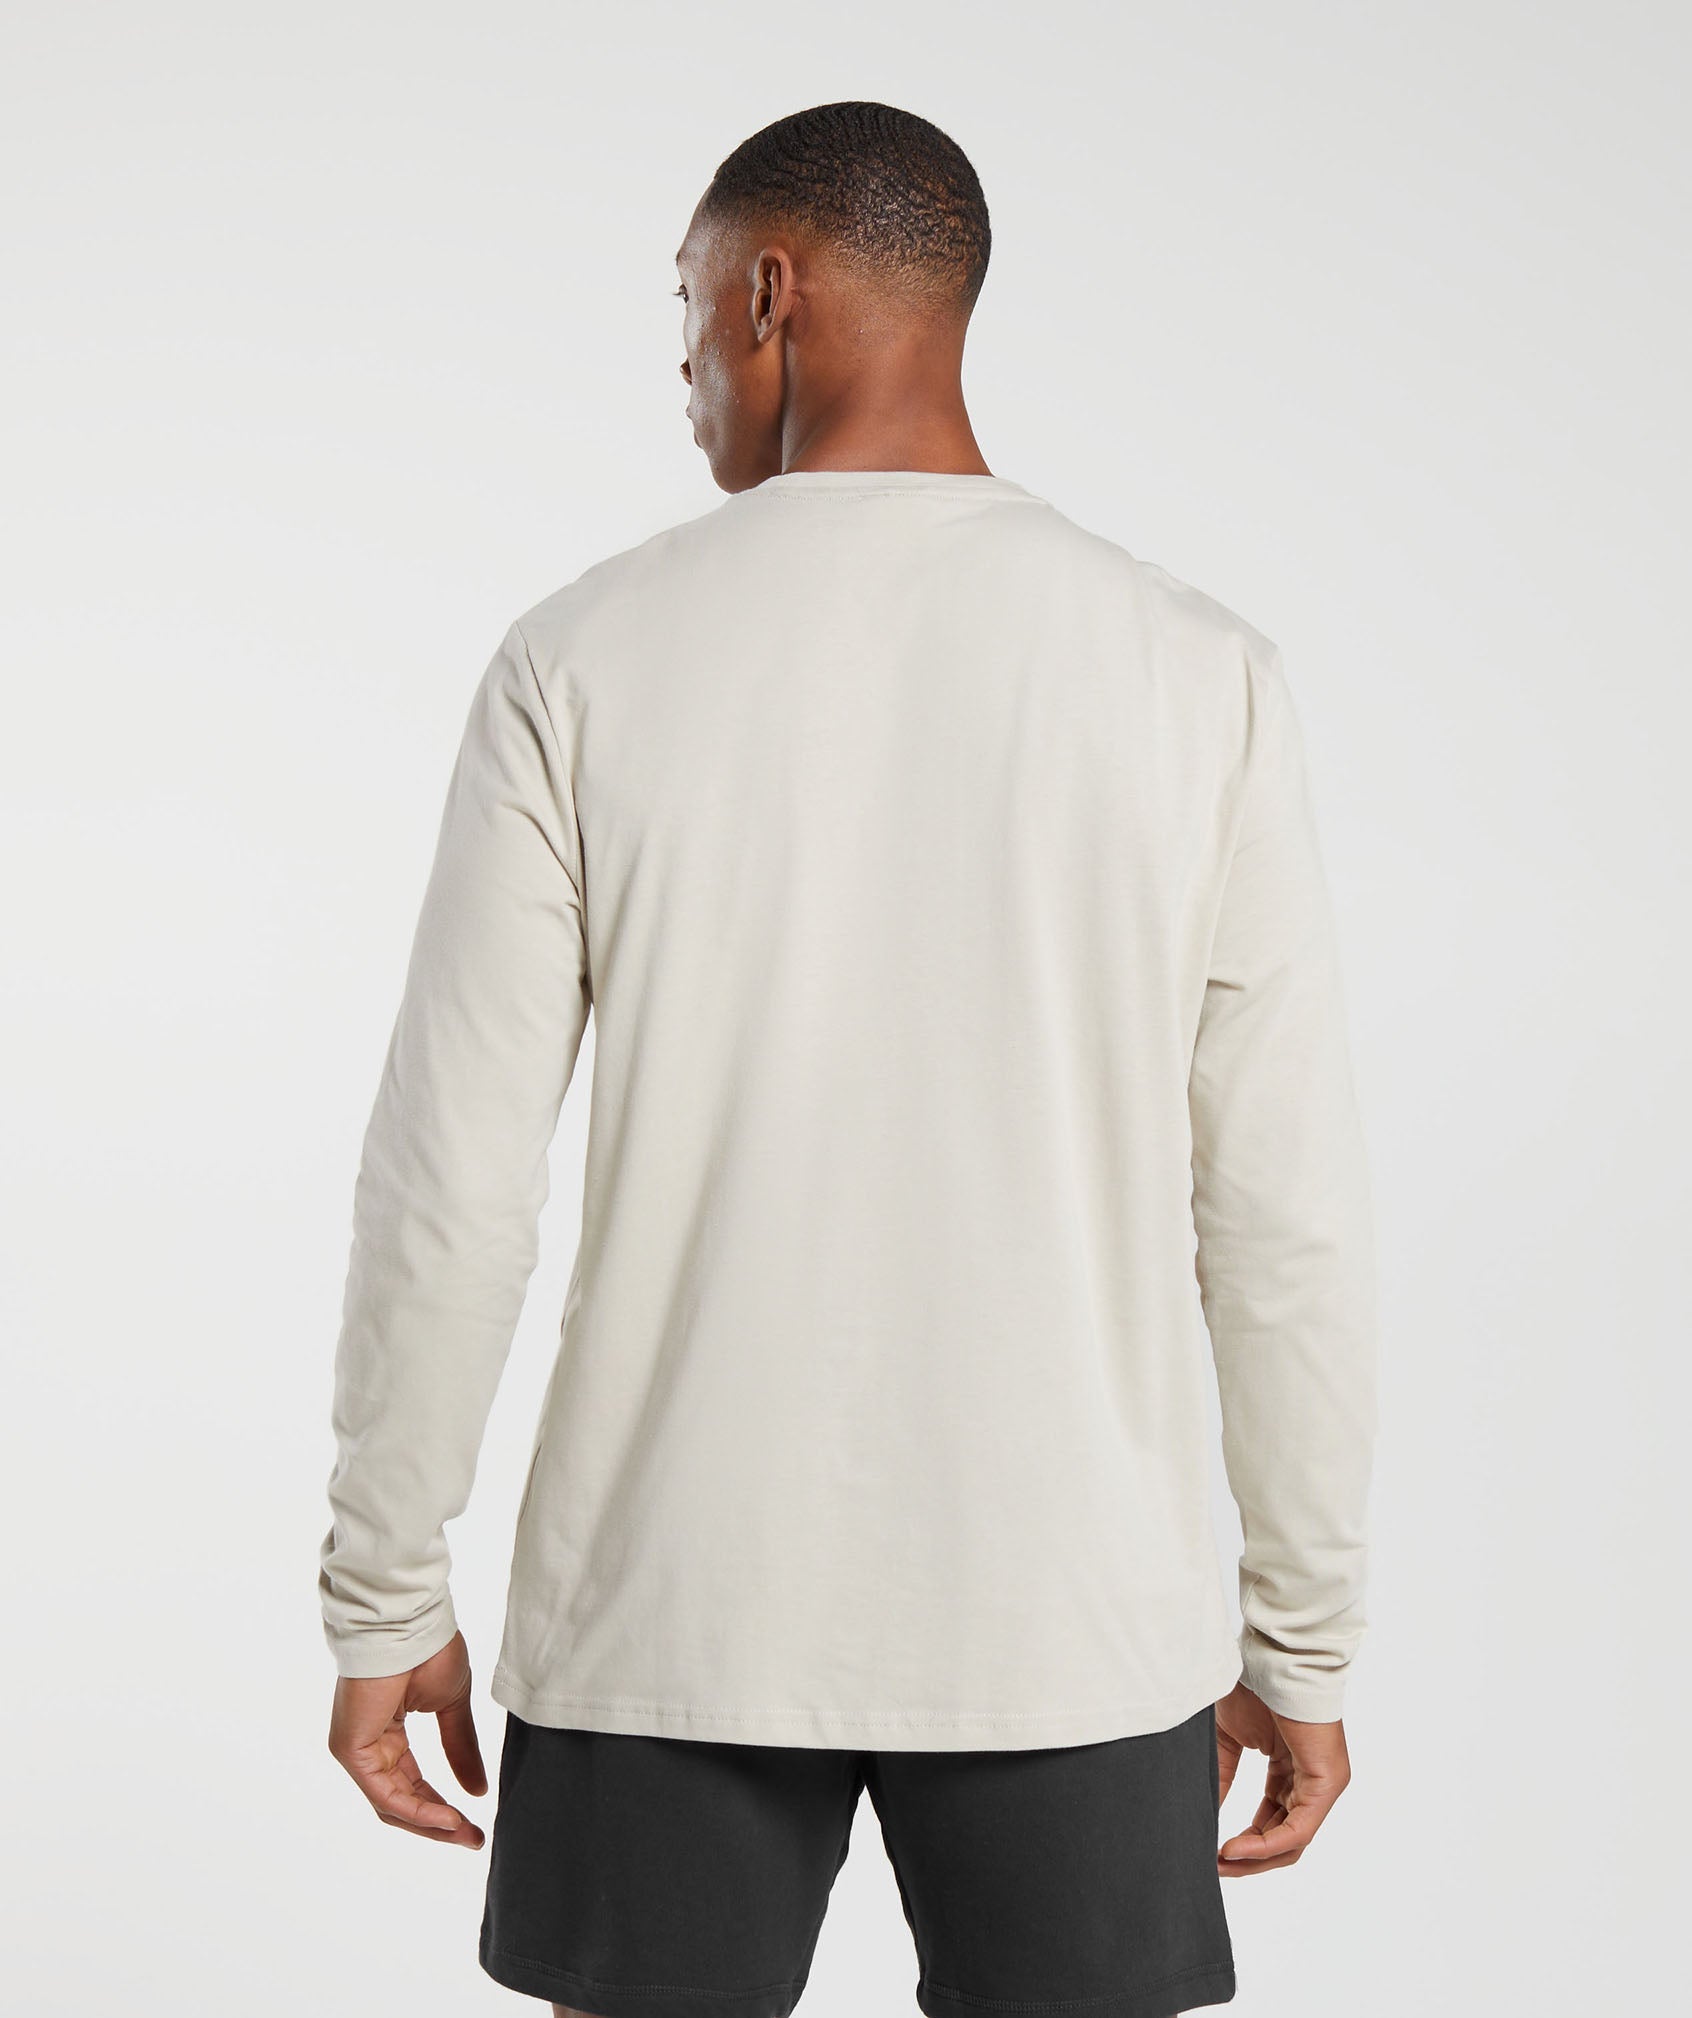 Crest Long Sleeve T-Shirt in Pebble Grey - view 2